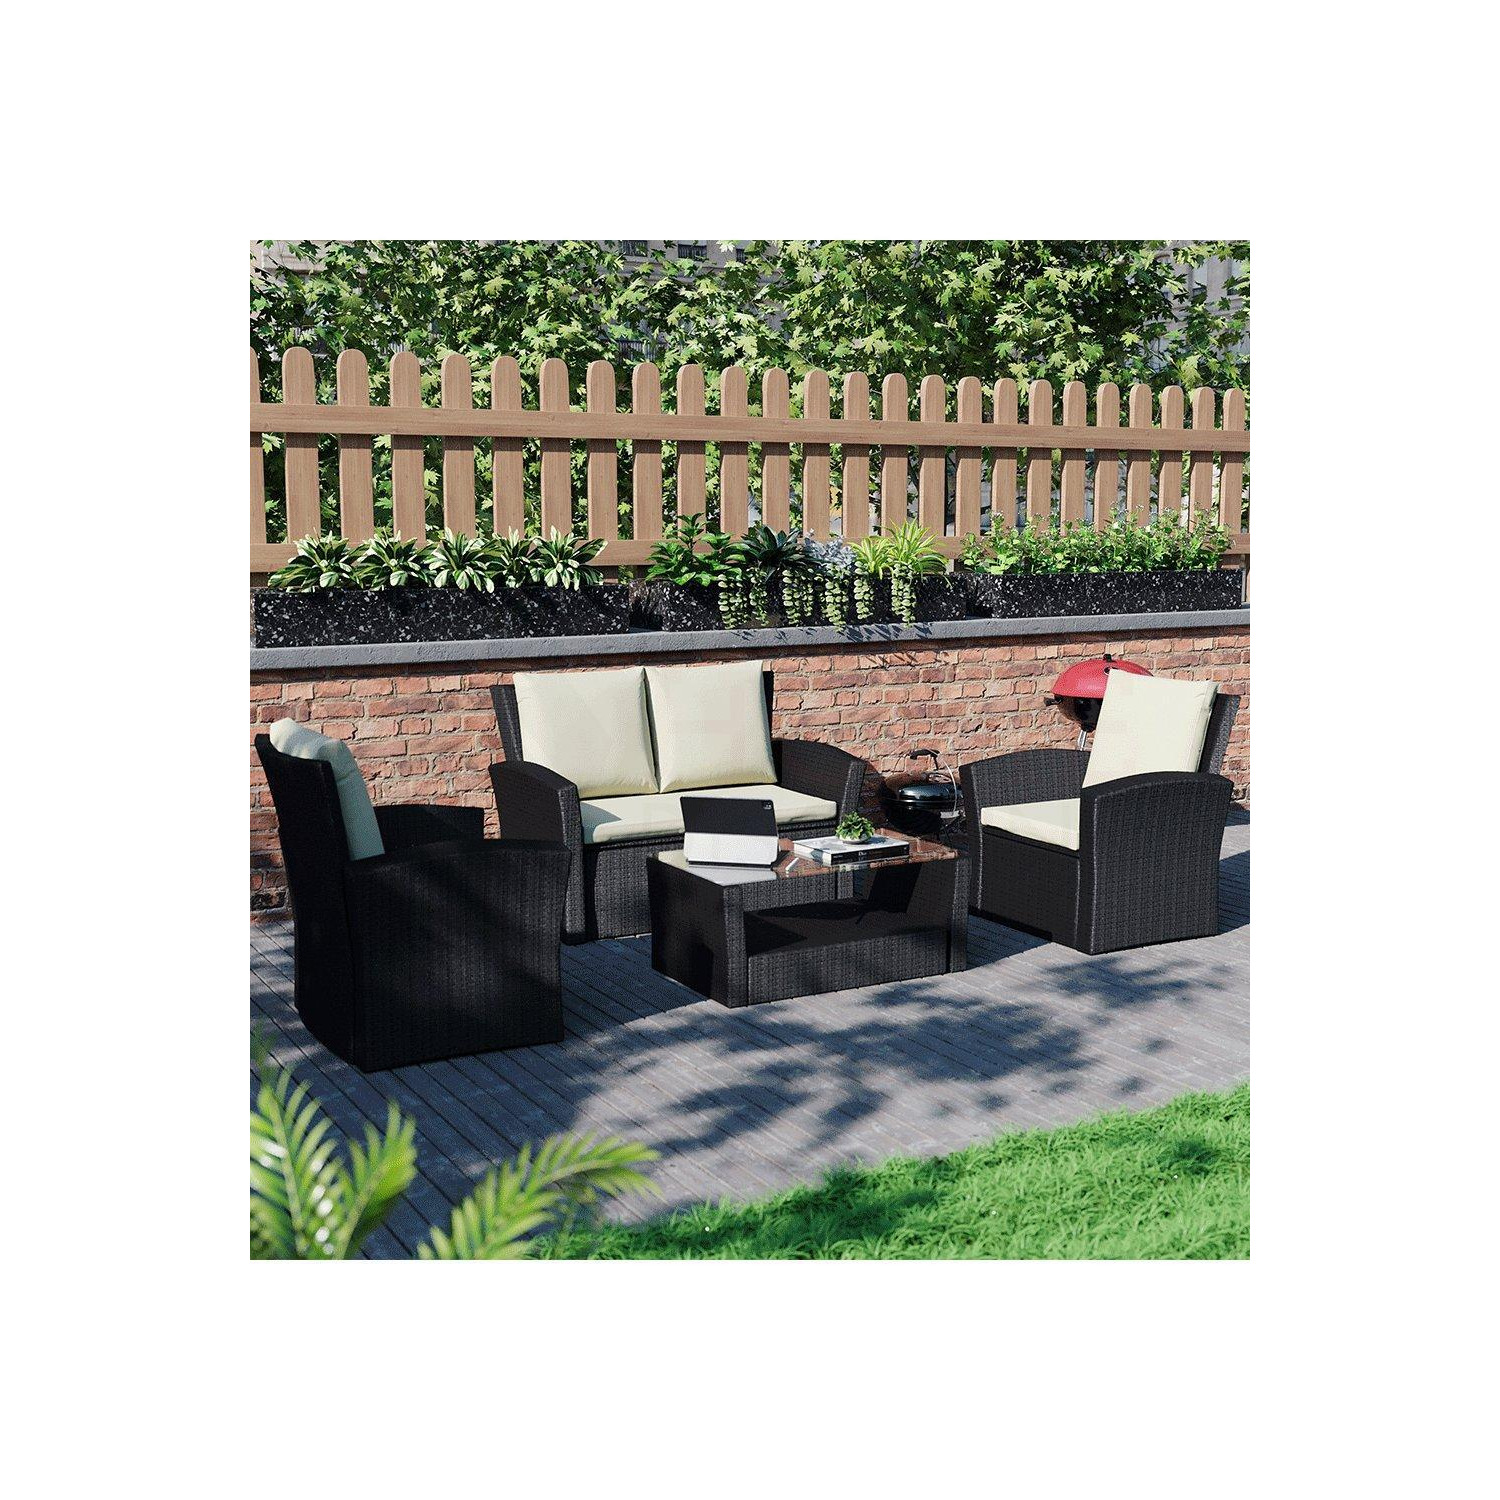 5 Pc and Cover - Garden Vida Mylor 4 Seater Rattan Set & Outdoor Patio Furniture Cover - image 1